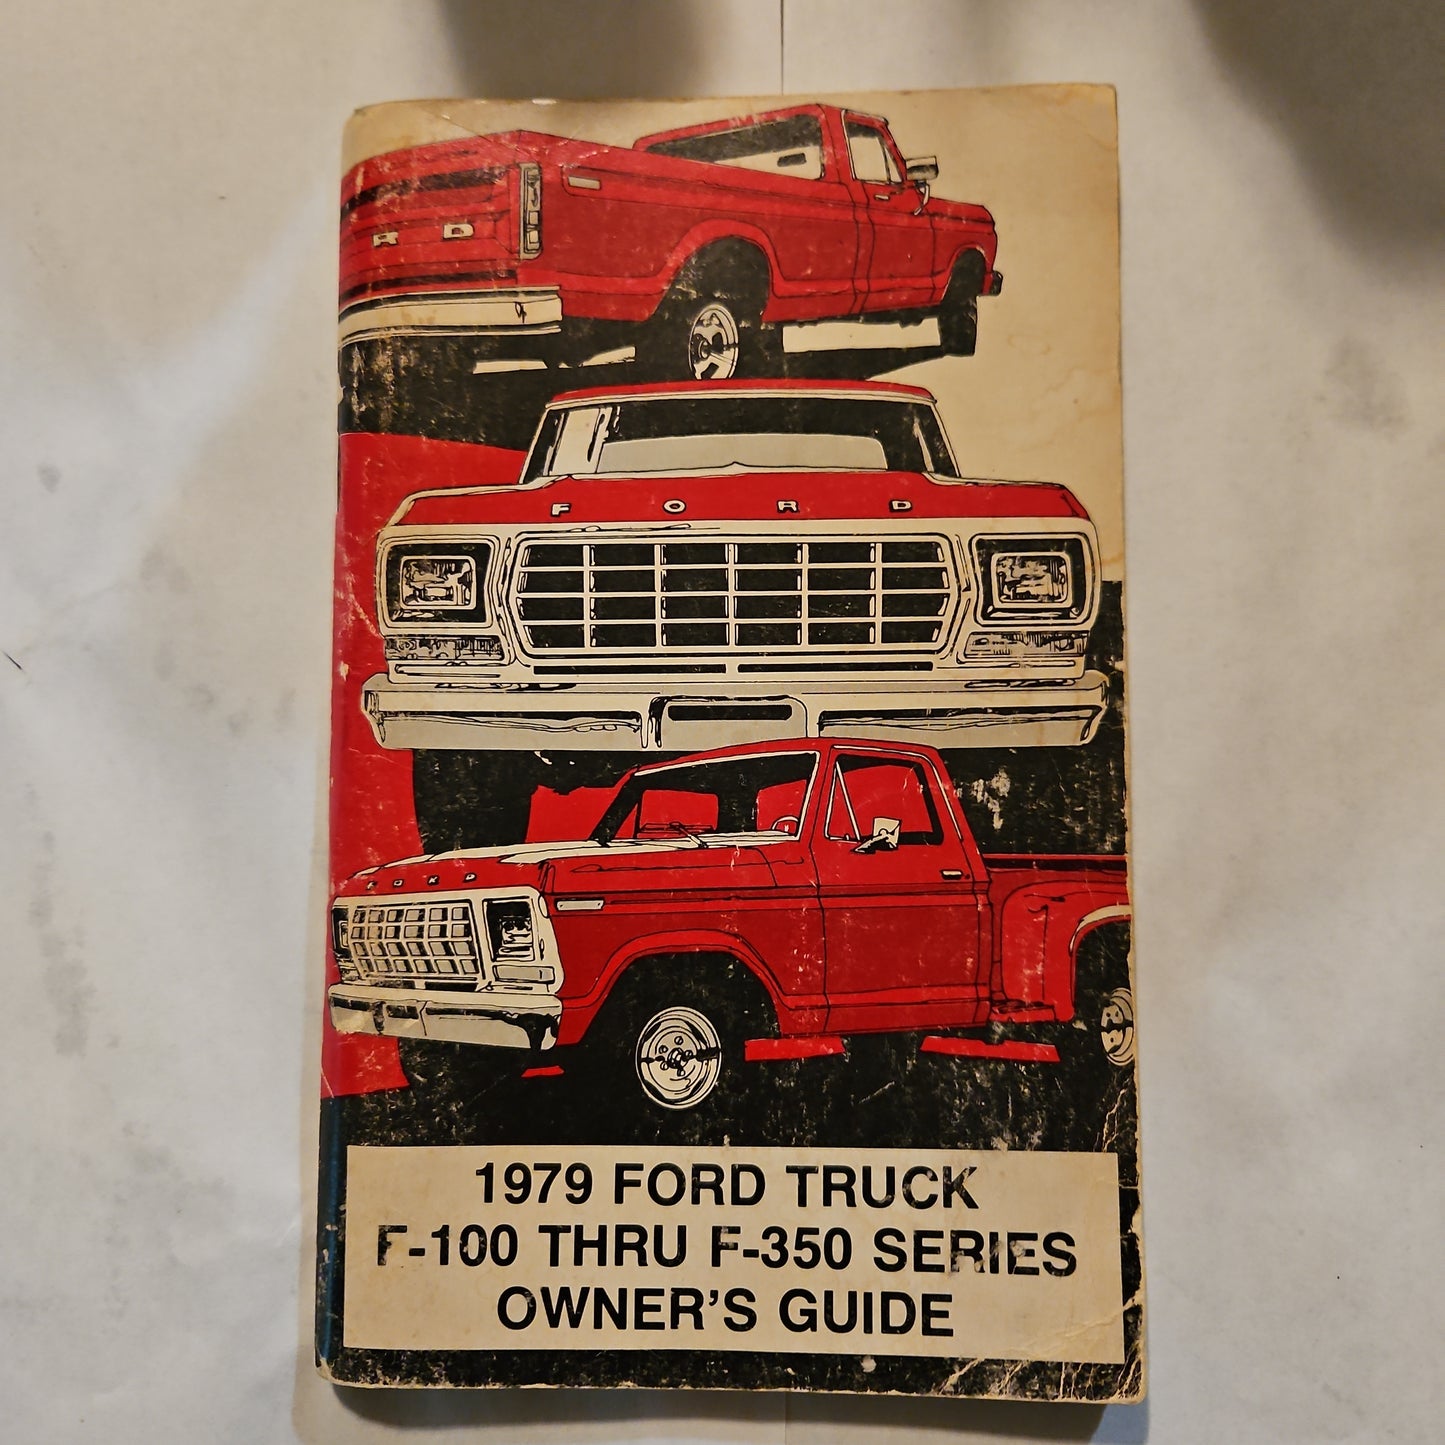 1979 Ford Truck F-100 thru F-350 Owner's Guide